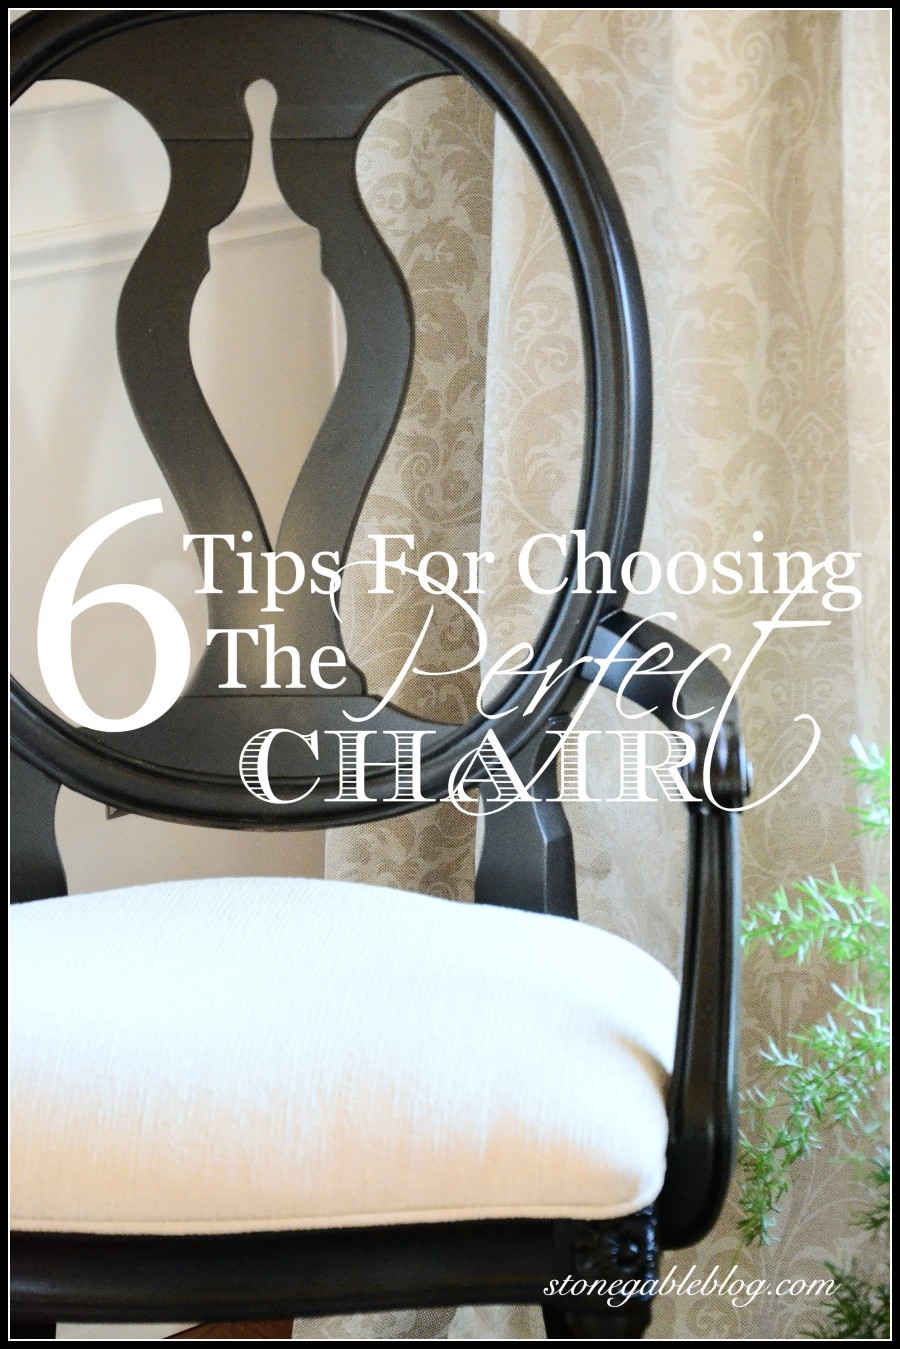 6 TIPS FOR CHOOSING THE PERFECT CHAIR